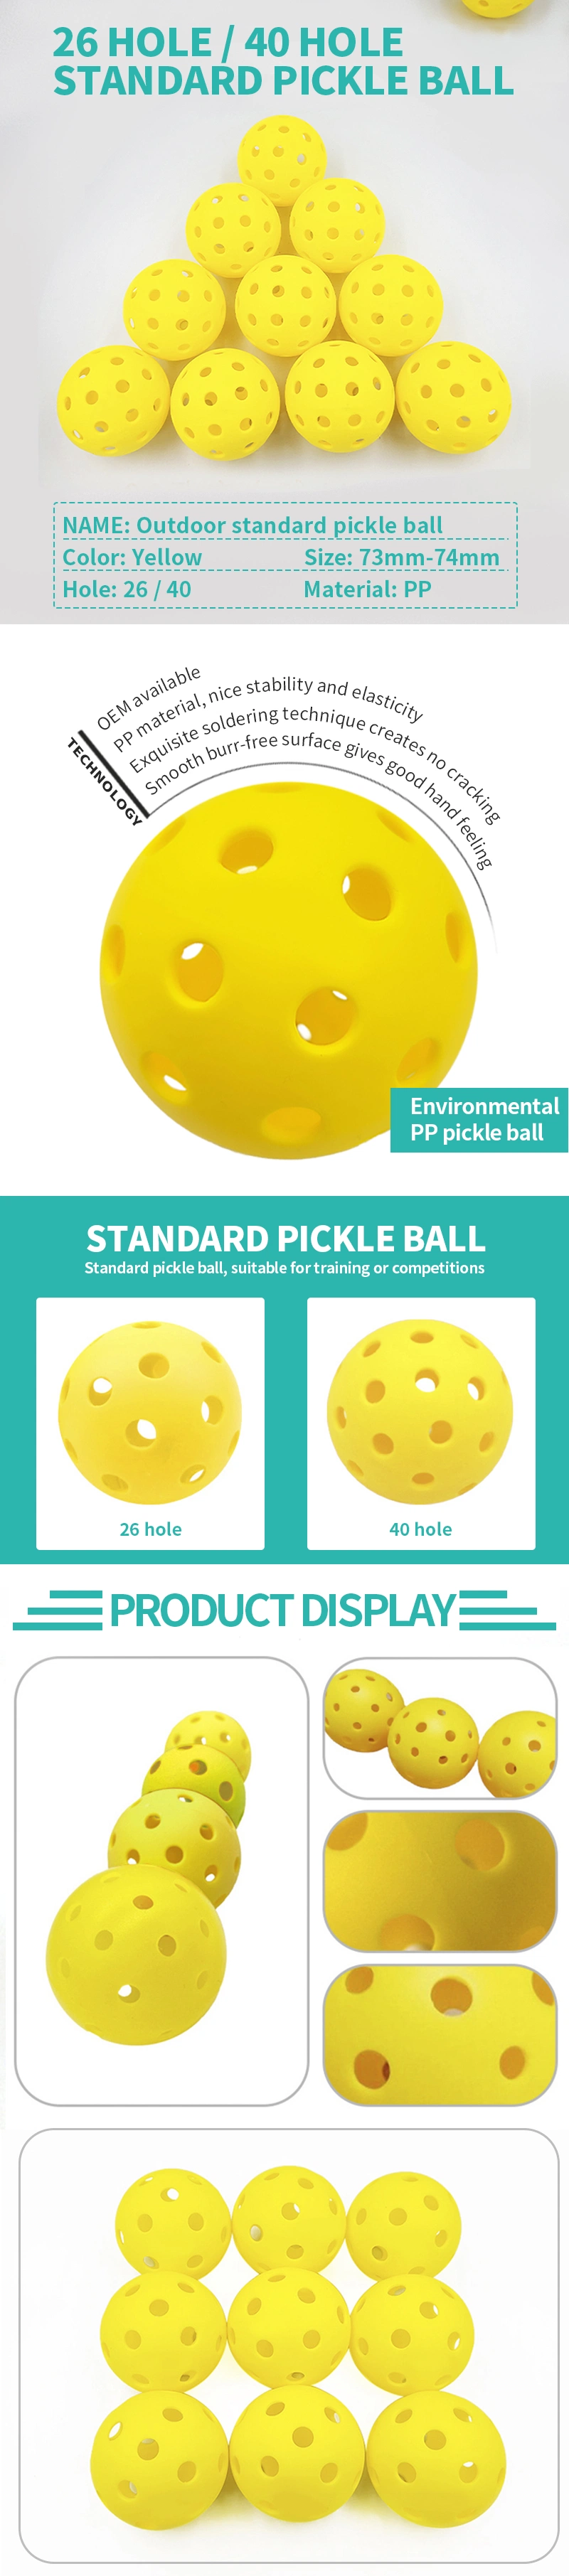 Hot Seller Standard Size 26 Hole / 40 Hole Pickle Balls for Outdoor and Indoor Pickleball Sport Training and Competition